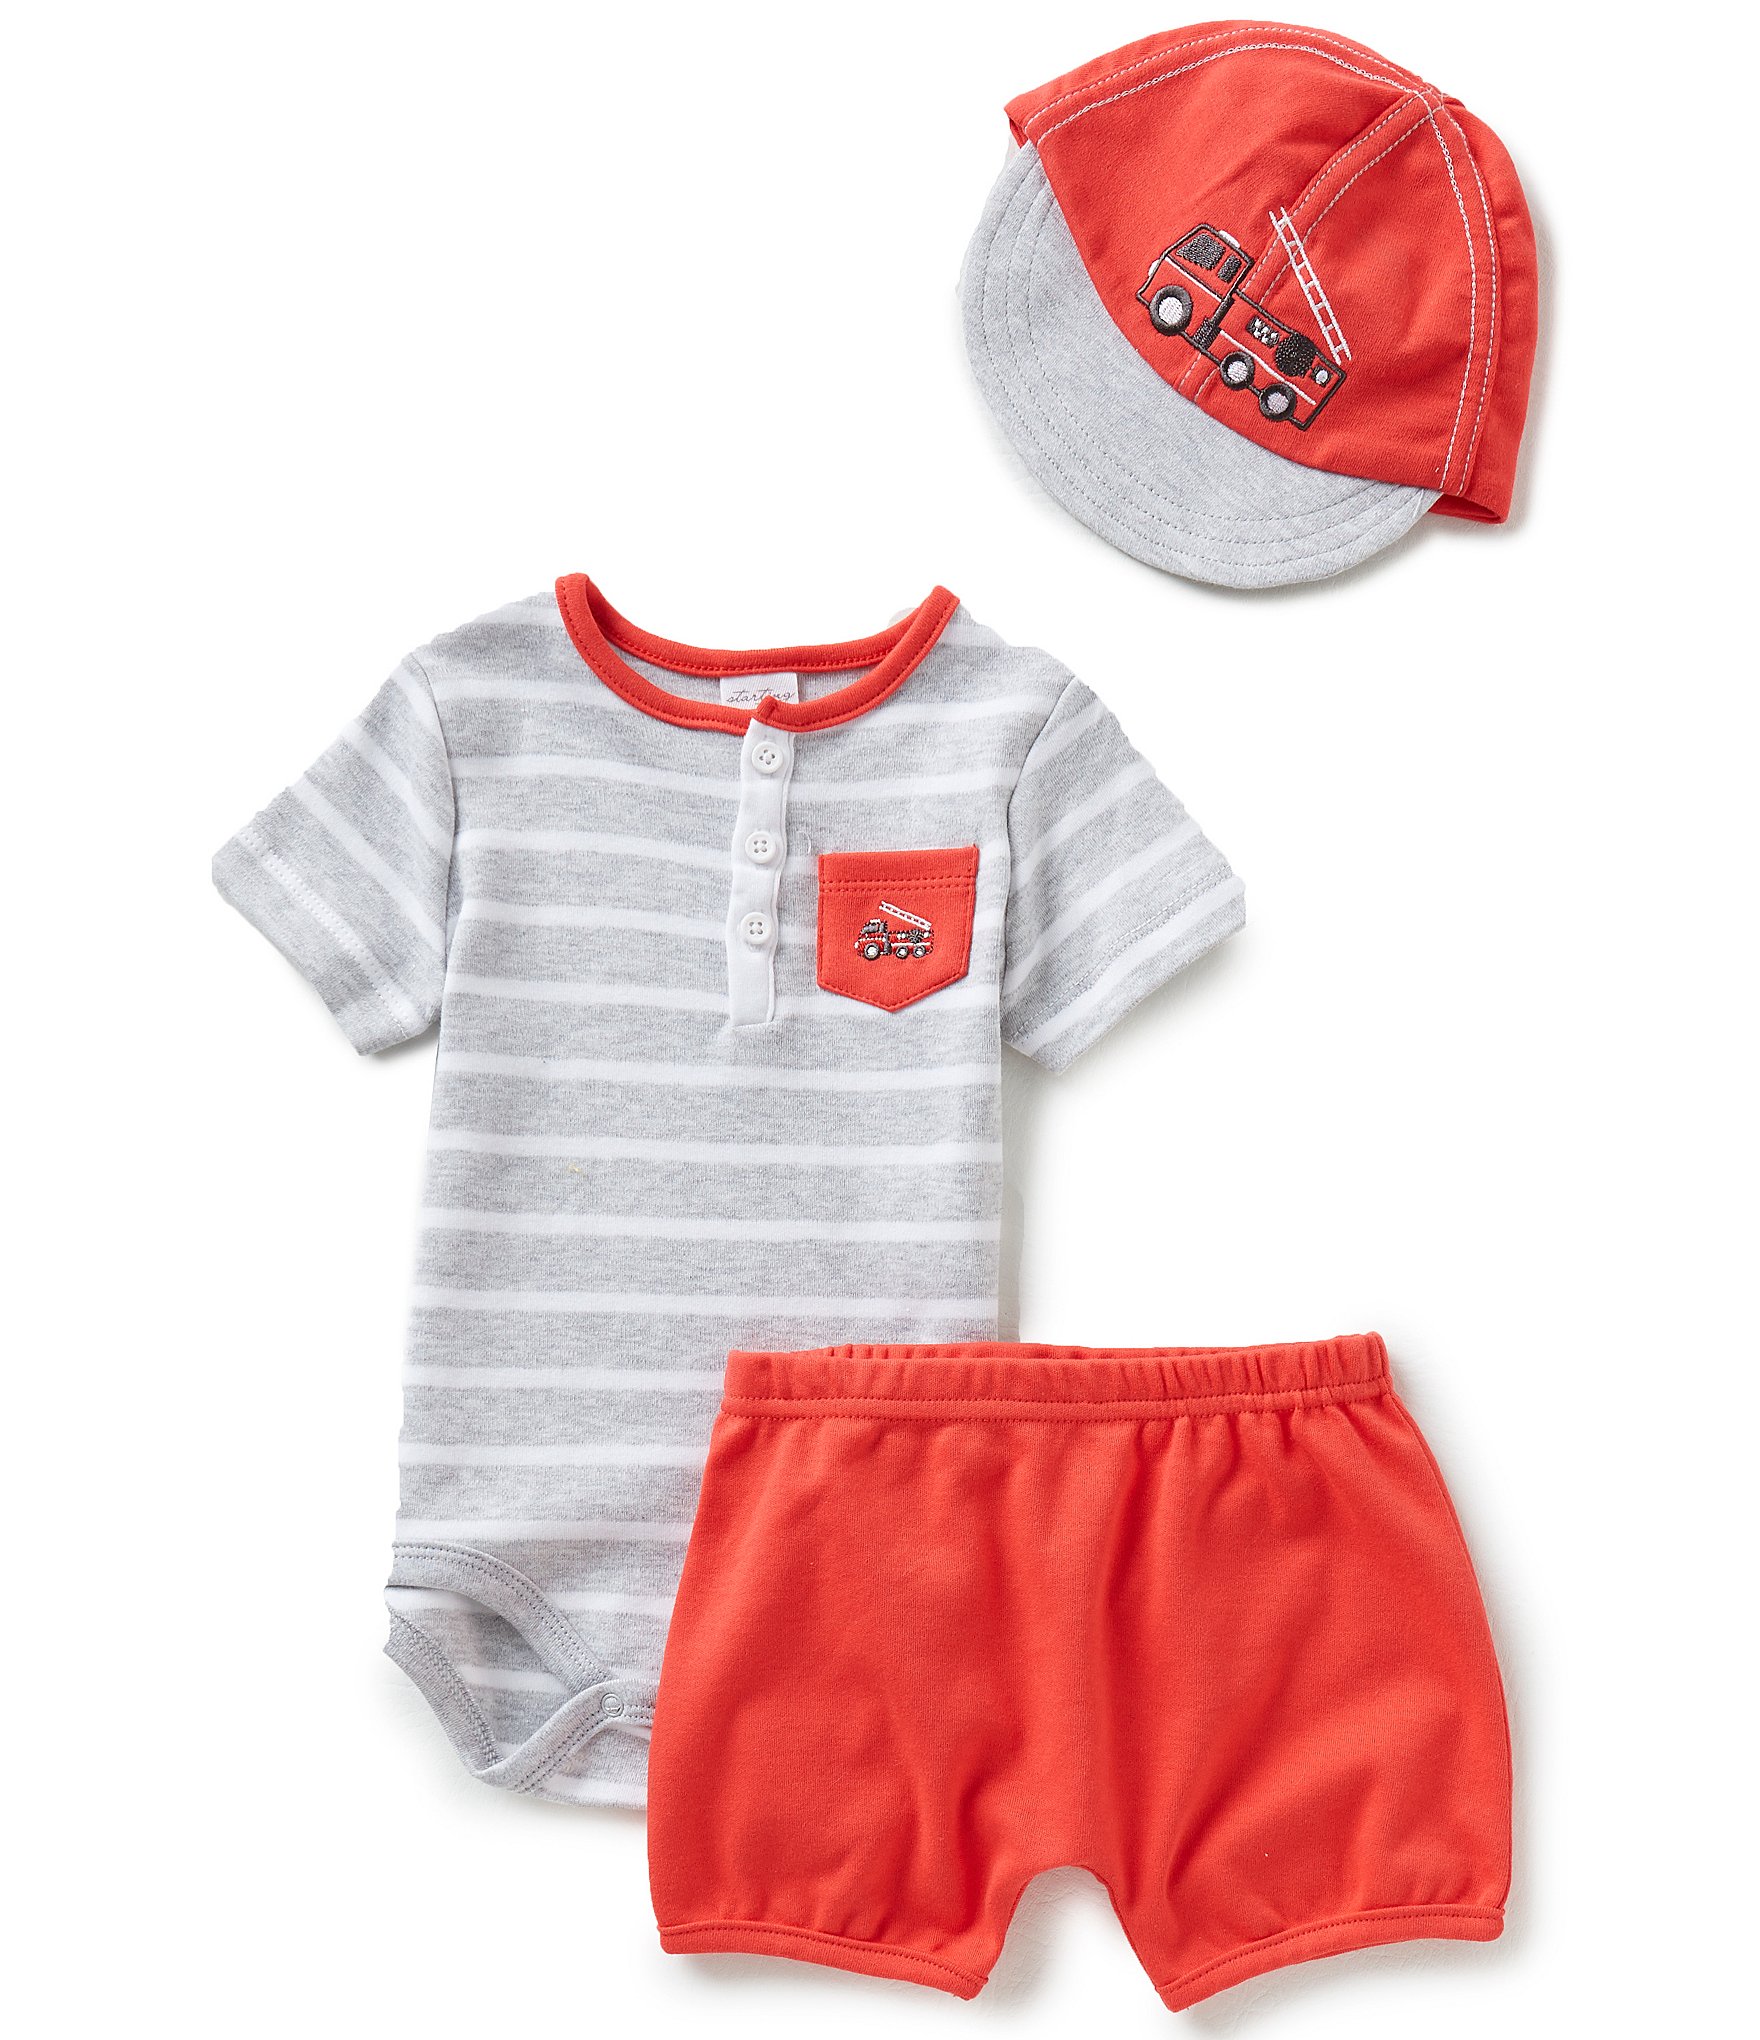 Ba Clearance Clothes Kids Ba Clothing Accessories within Awesome Dillards Baby Boy Clothes you should look